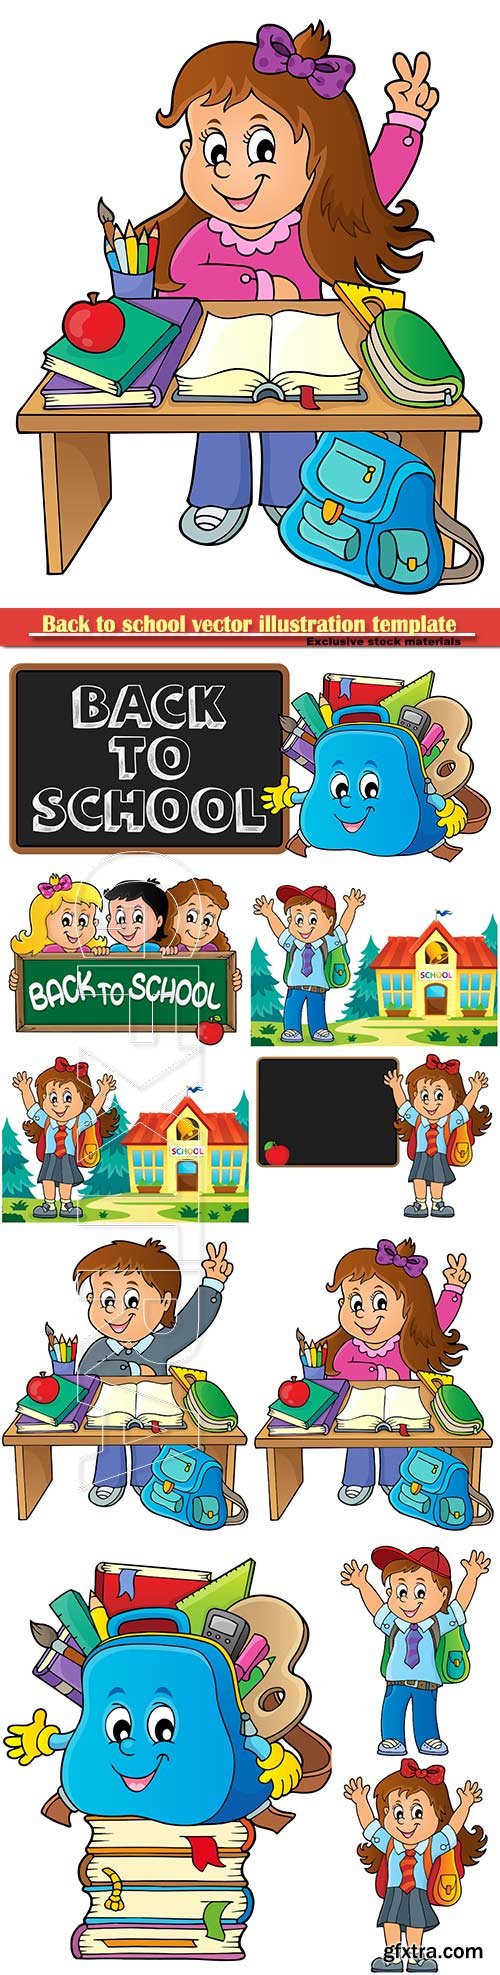 Back to school vector illustration template # 2